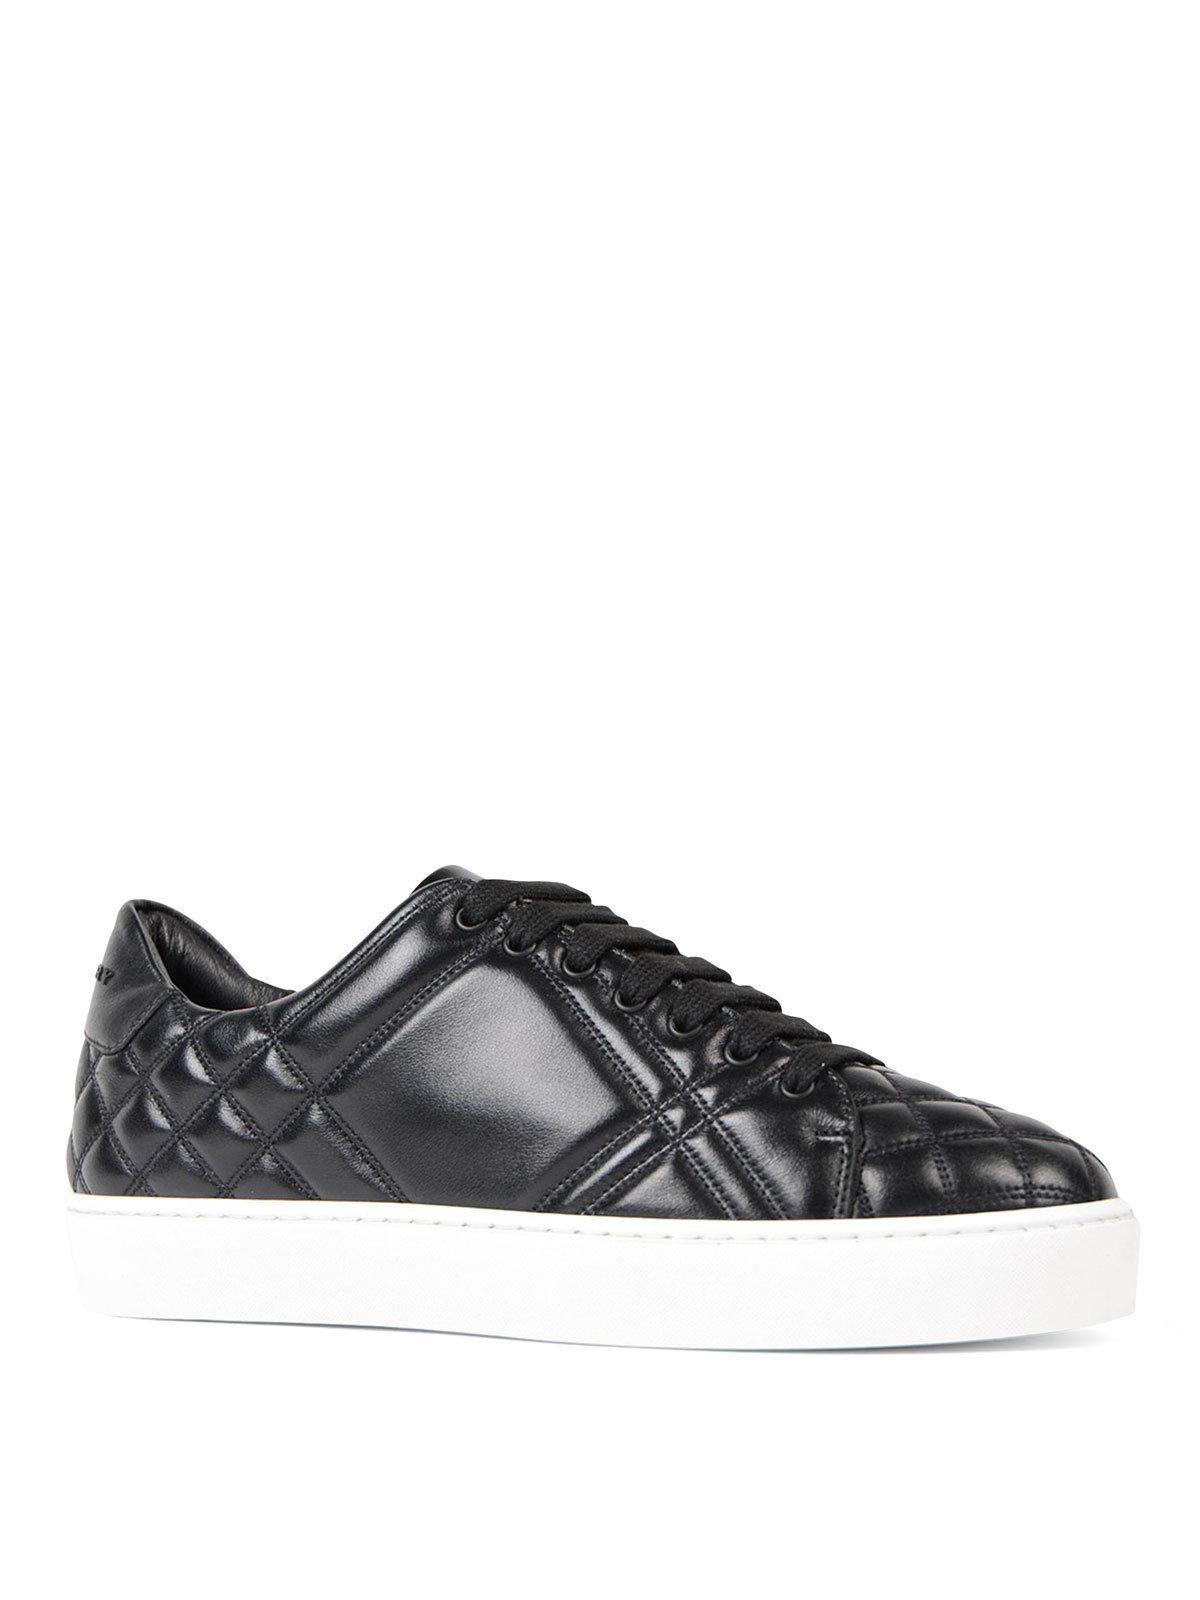 burberry westford quilted sneakers